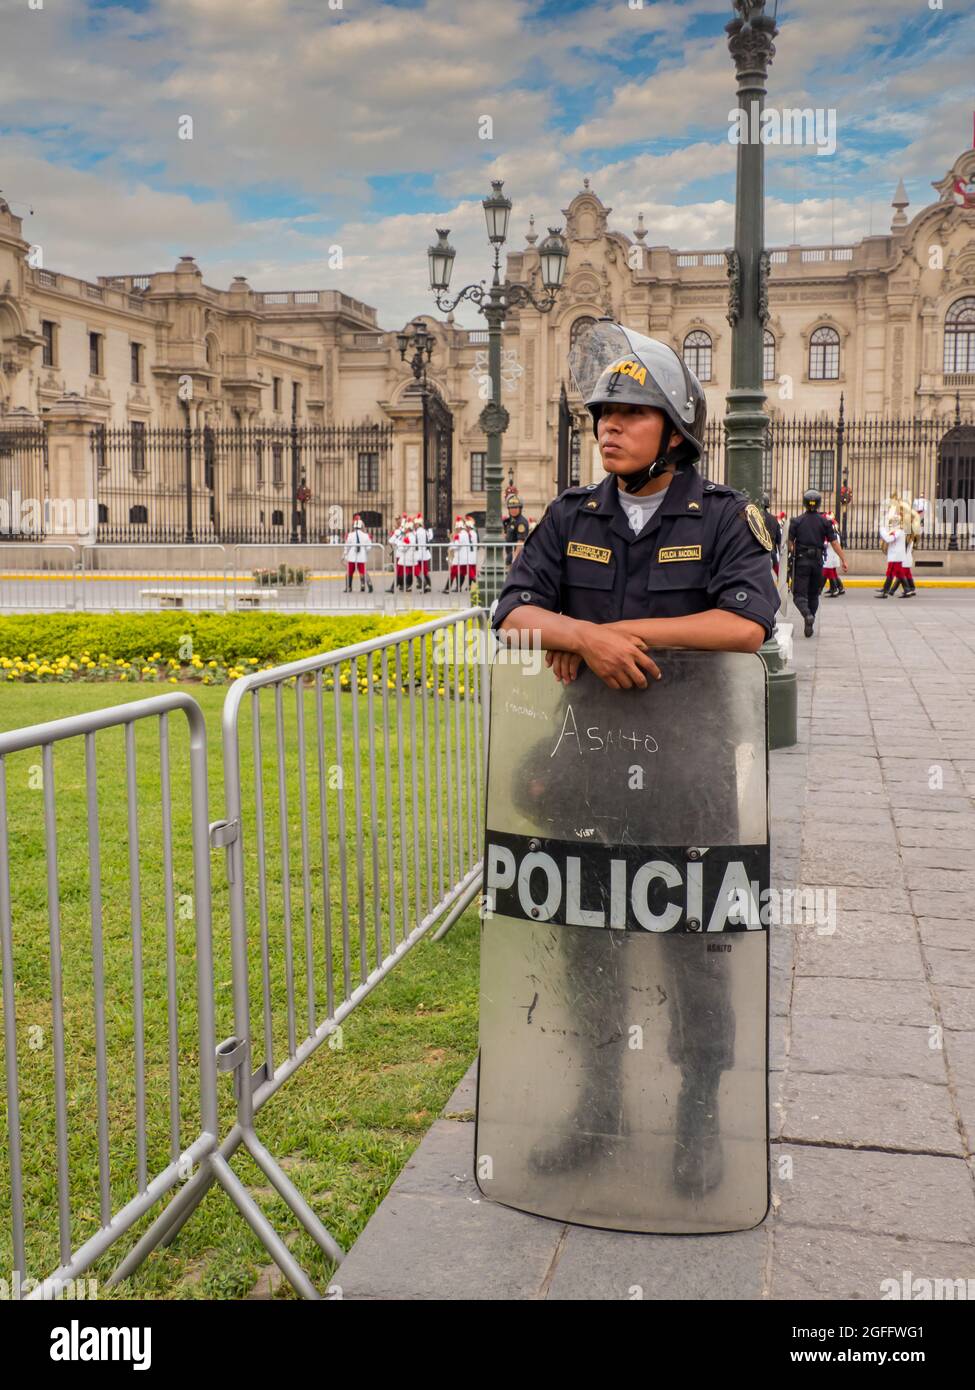 LIma, Peru - Dec 2019: Armed riot police on the streets of Lima. Policia. South America. Stock Photo